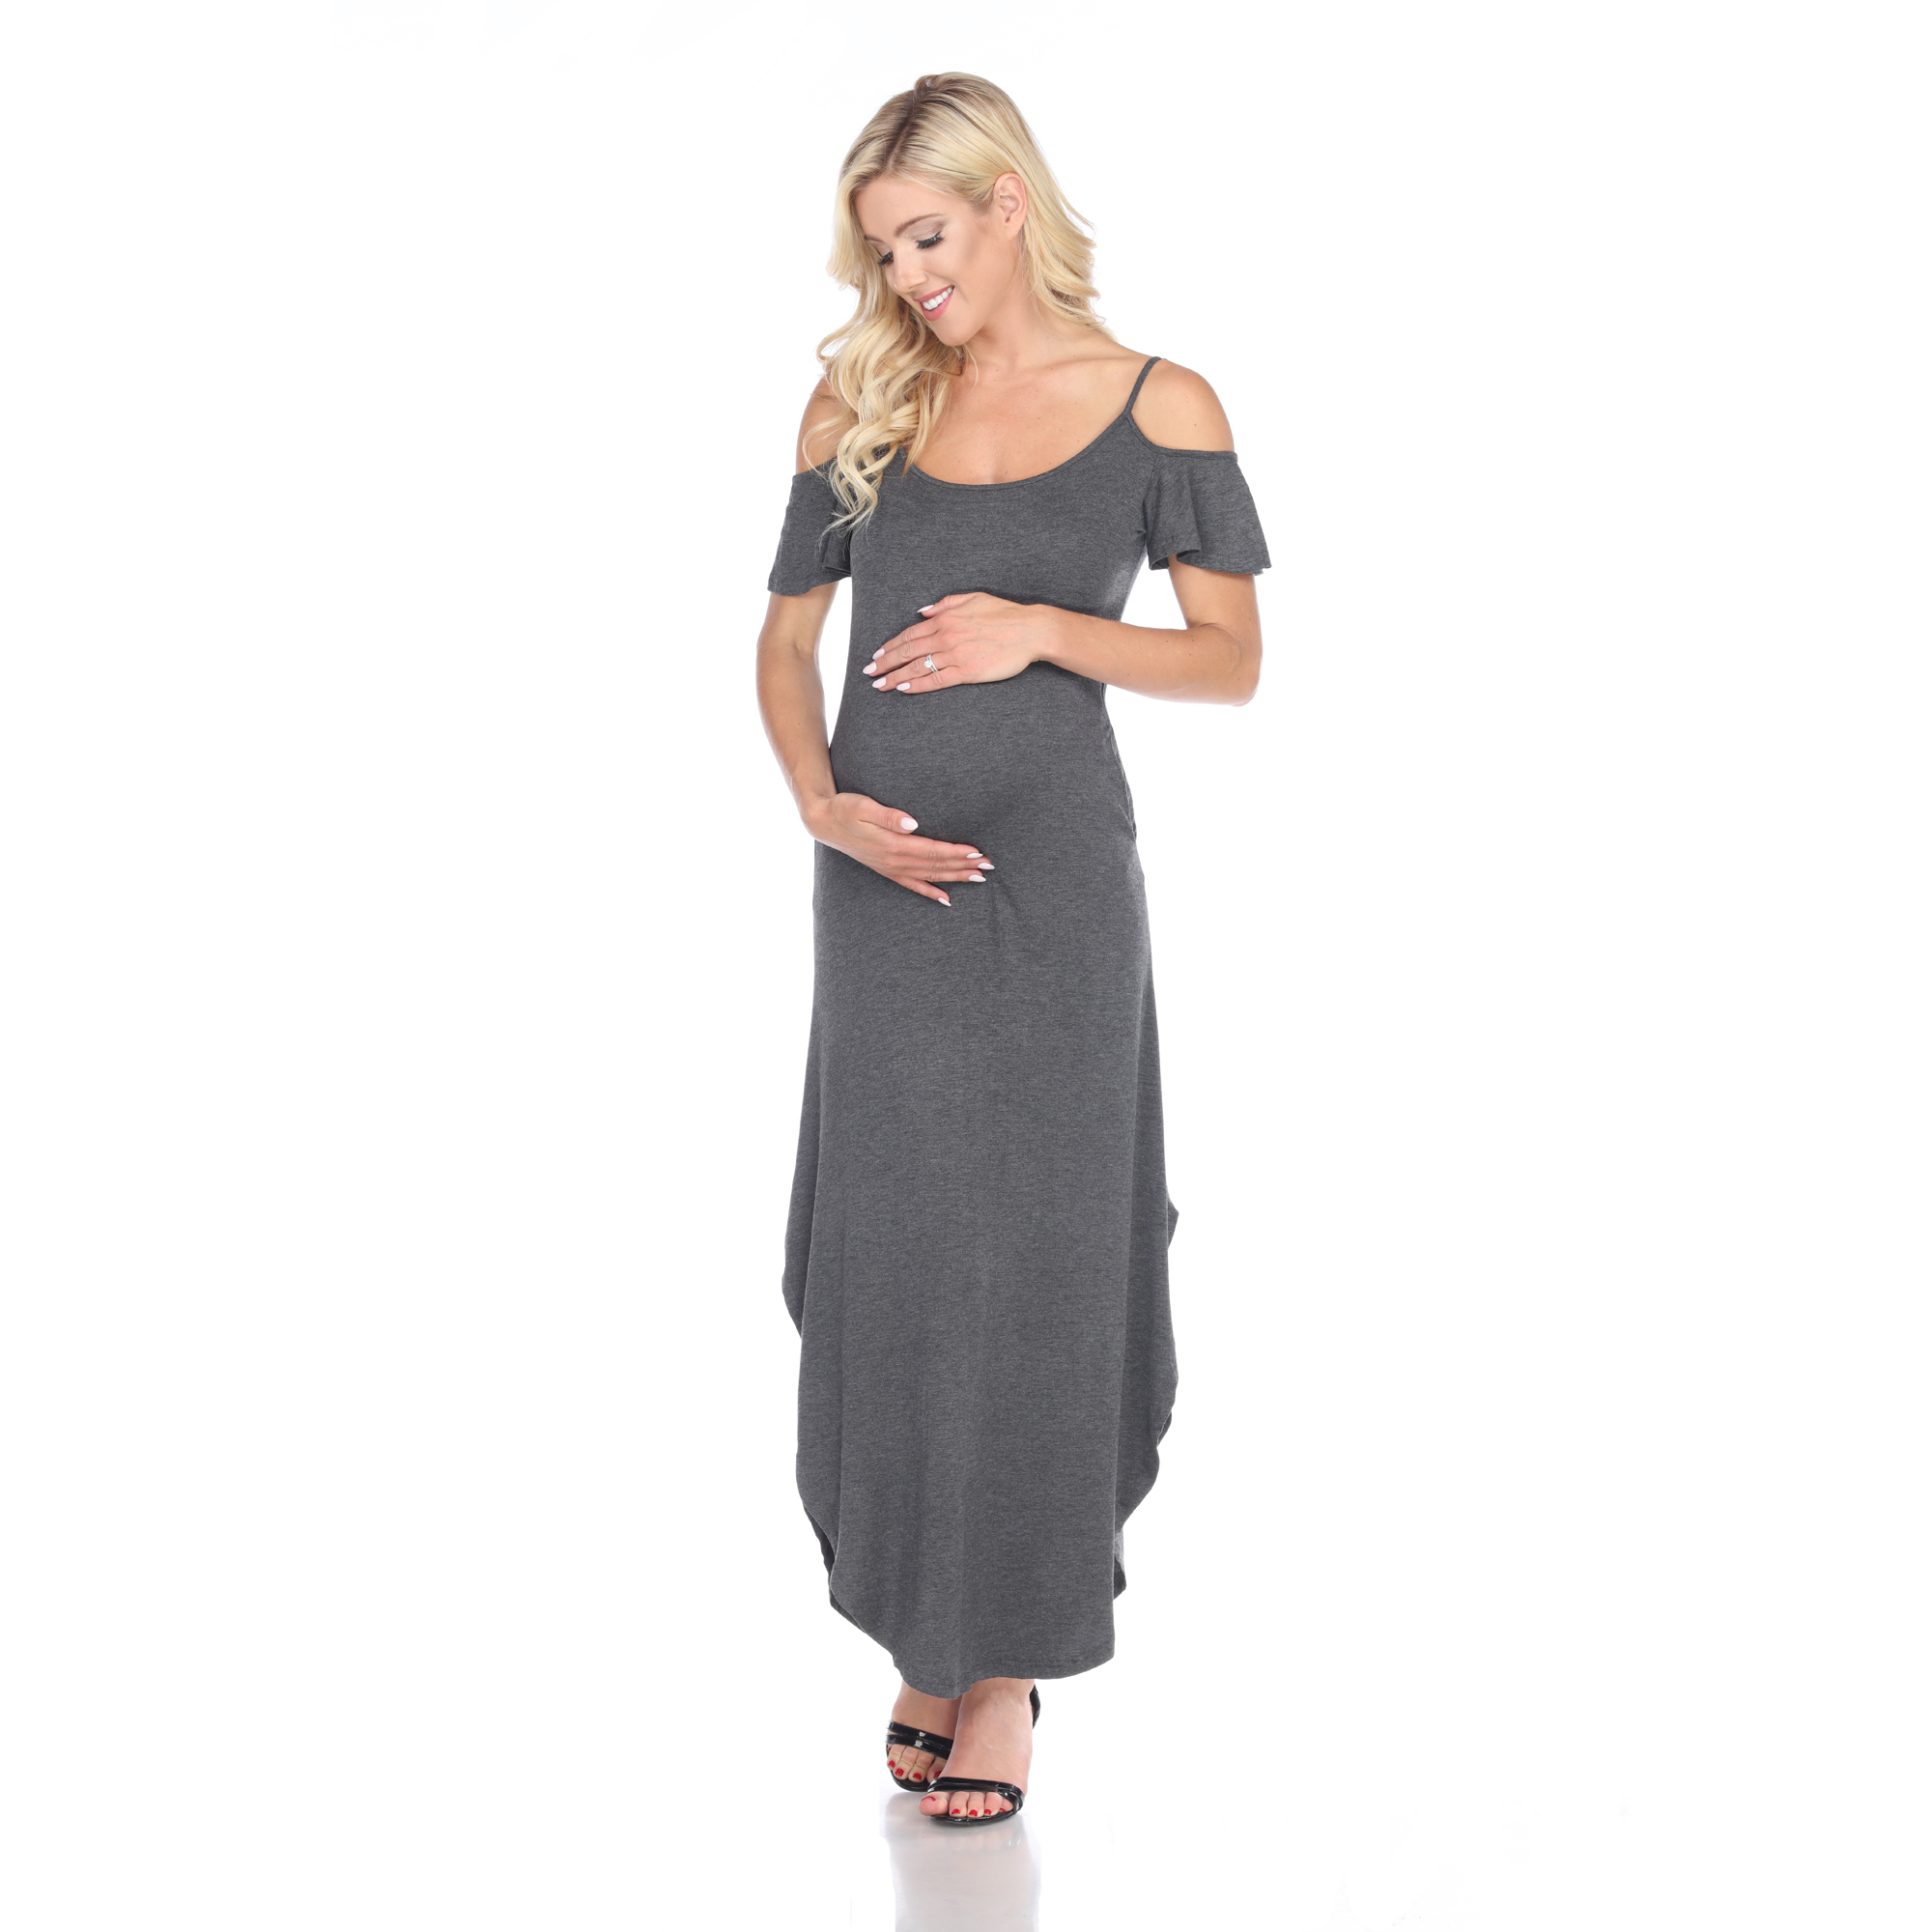 White Mark Women's Maternity Cold Shoulder Maxi Dress - Charcoal, 1X